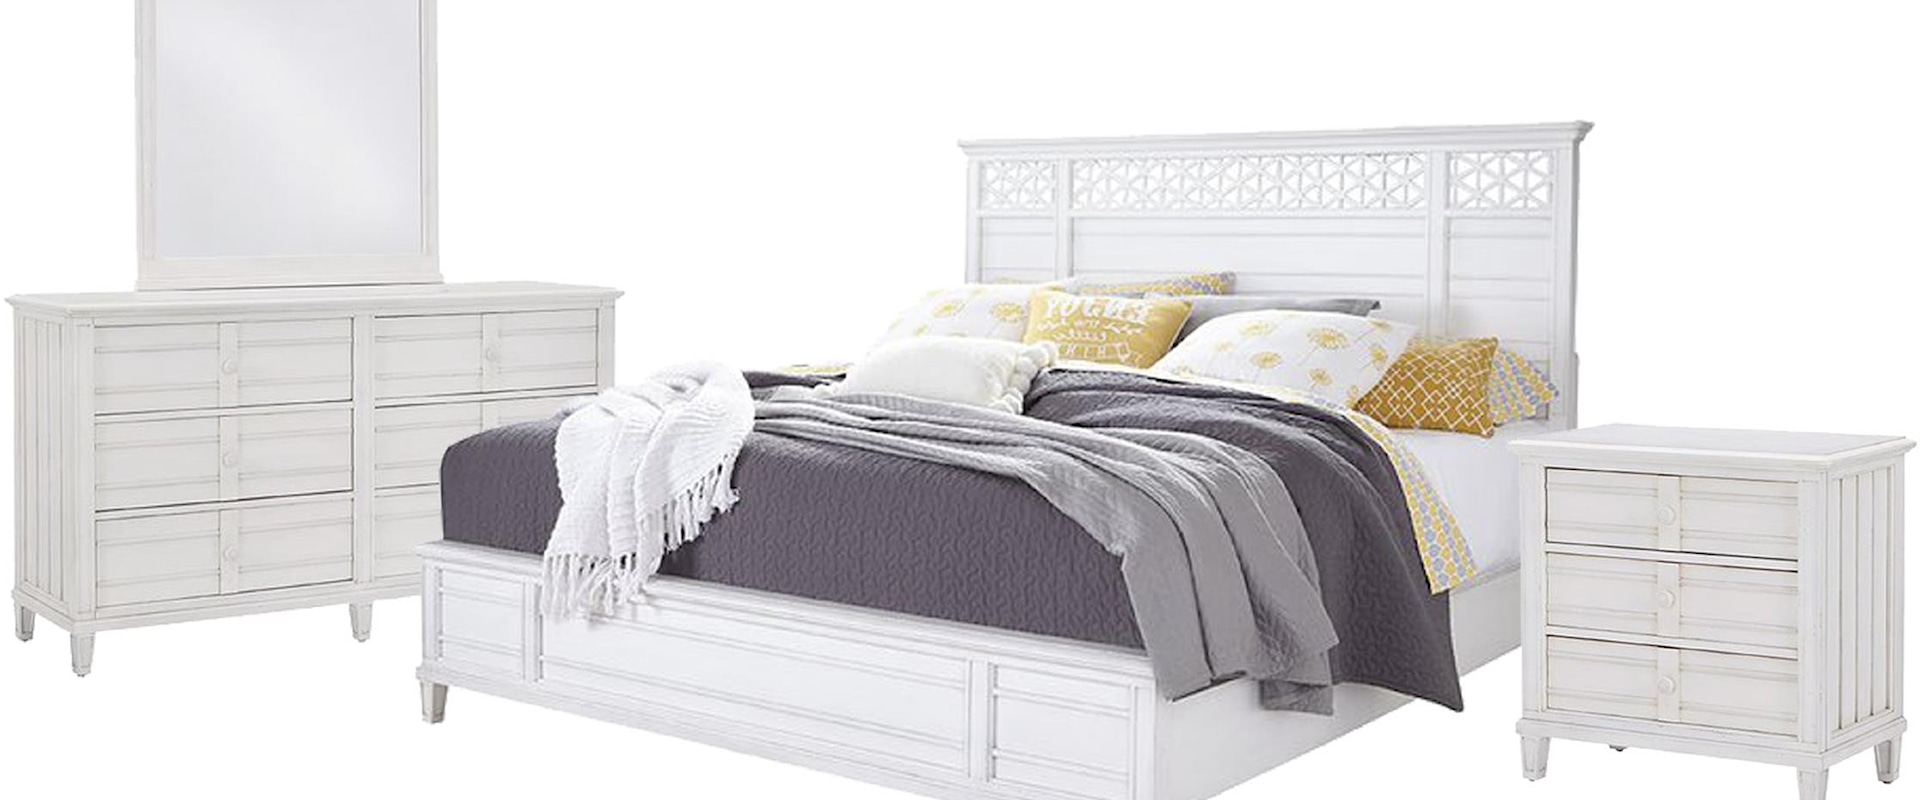 King Fretwork Panel Bed, 6 Drawer Dresser, Mirror, and 3 Drawer Nightstand